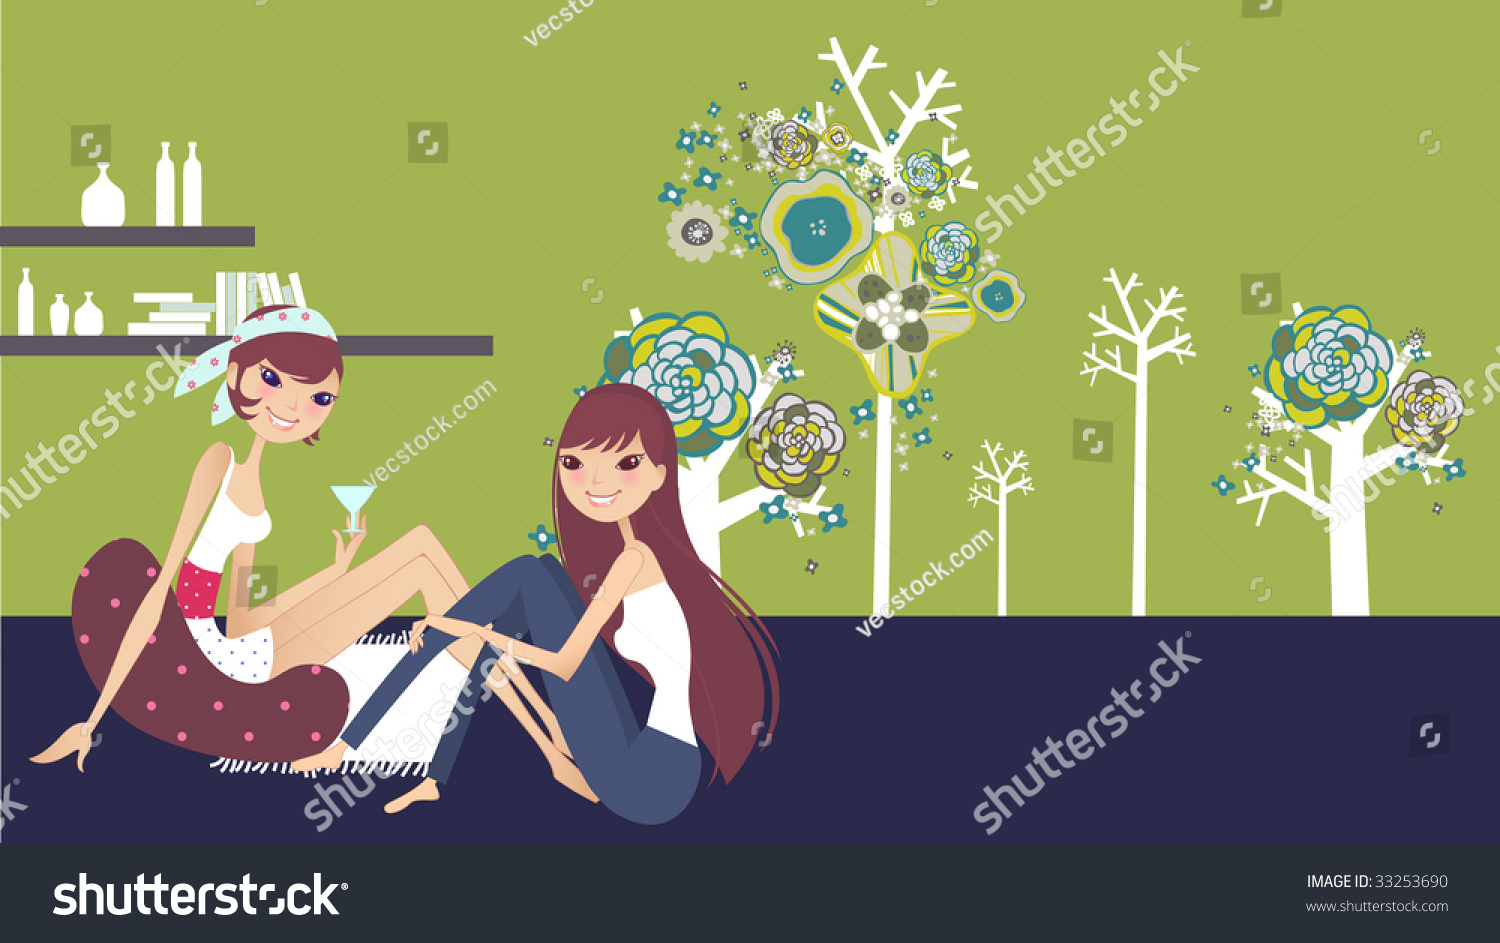 Two Girls Having Fun And Chill Stock Vector Illustration 33253690 Shutterstock 